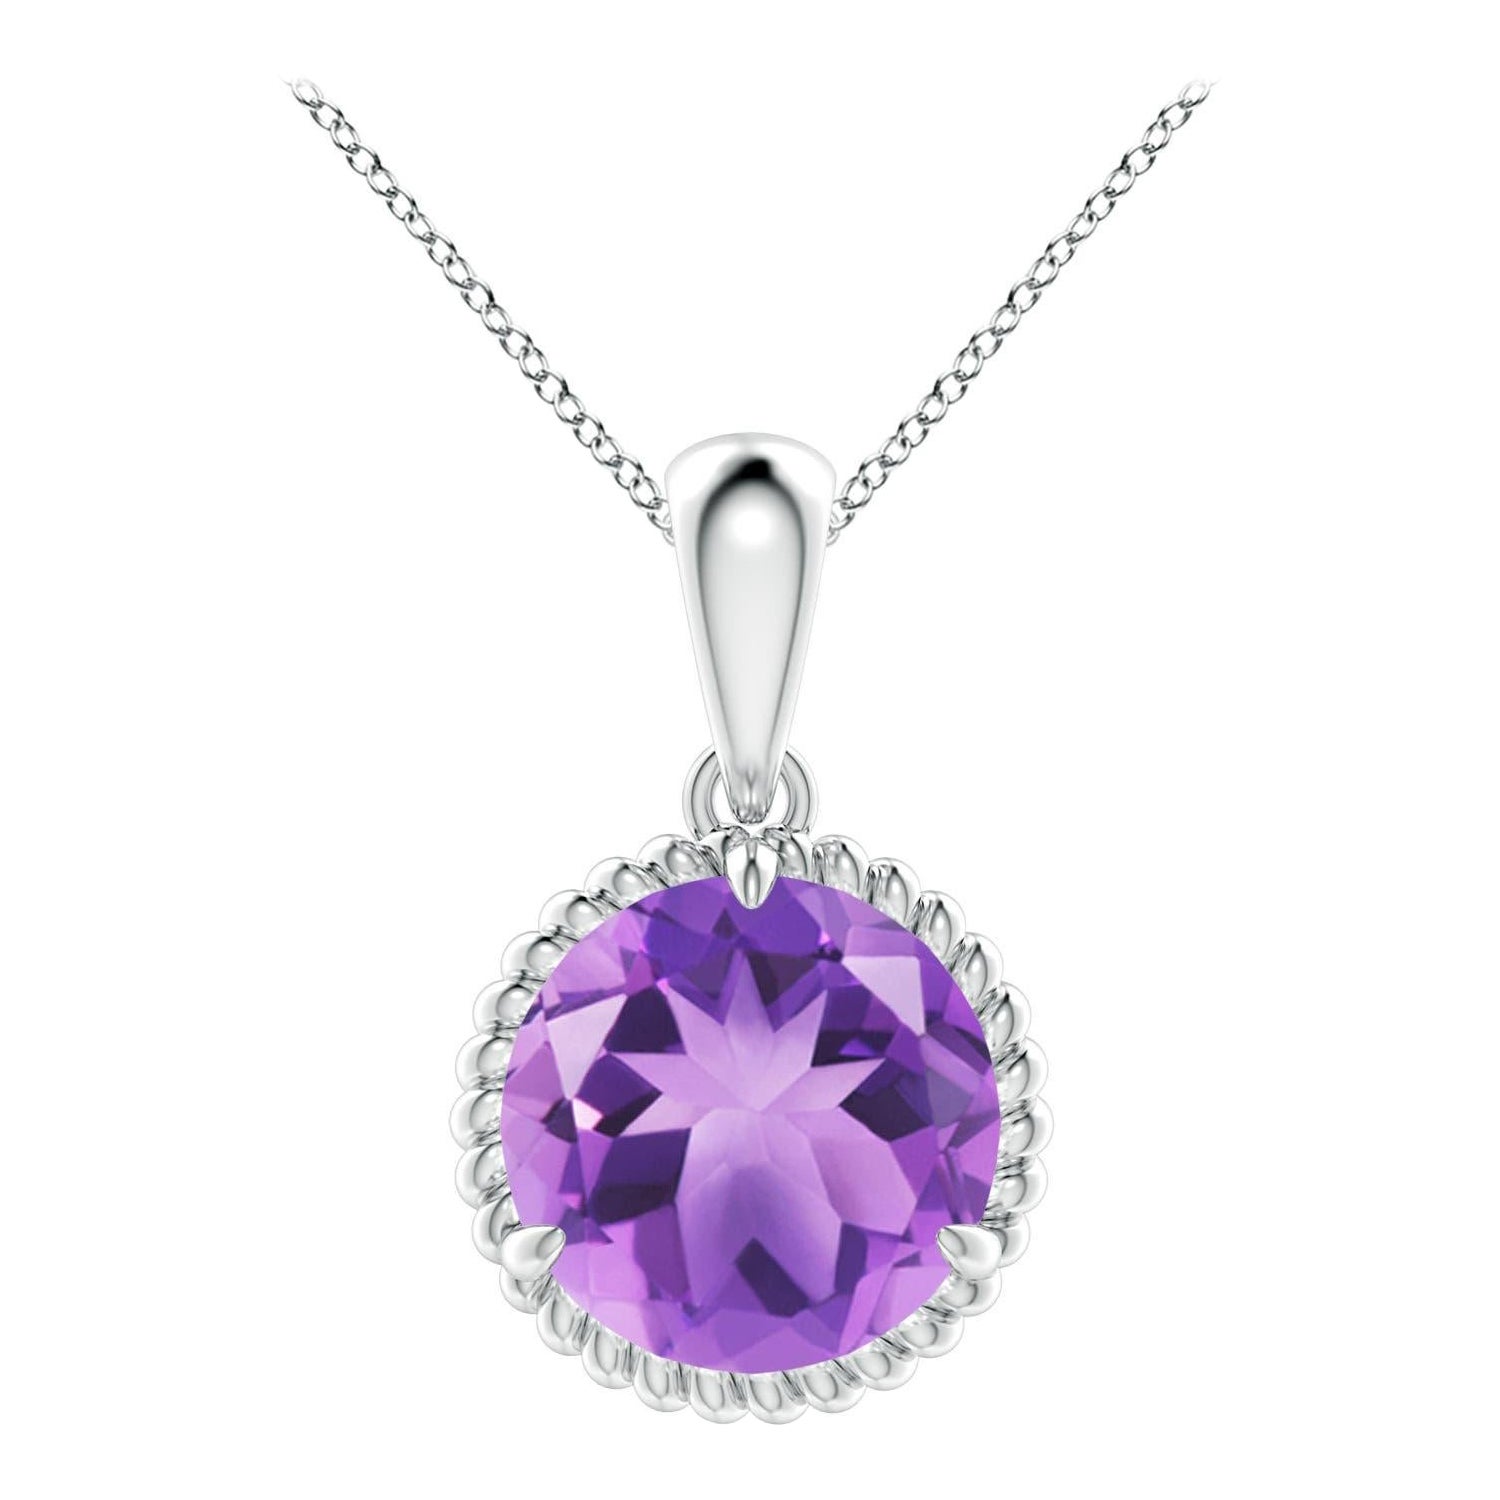 Natural Rope-Framed 3.2ct Amethyst Solitaire Pendant in 14K White Gold